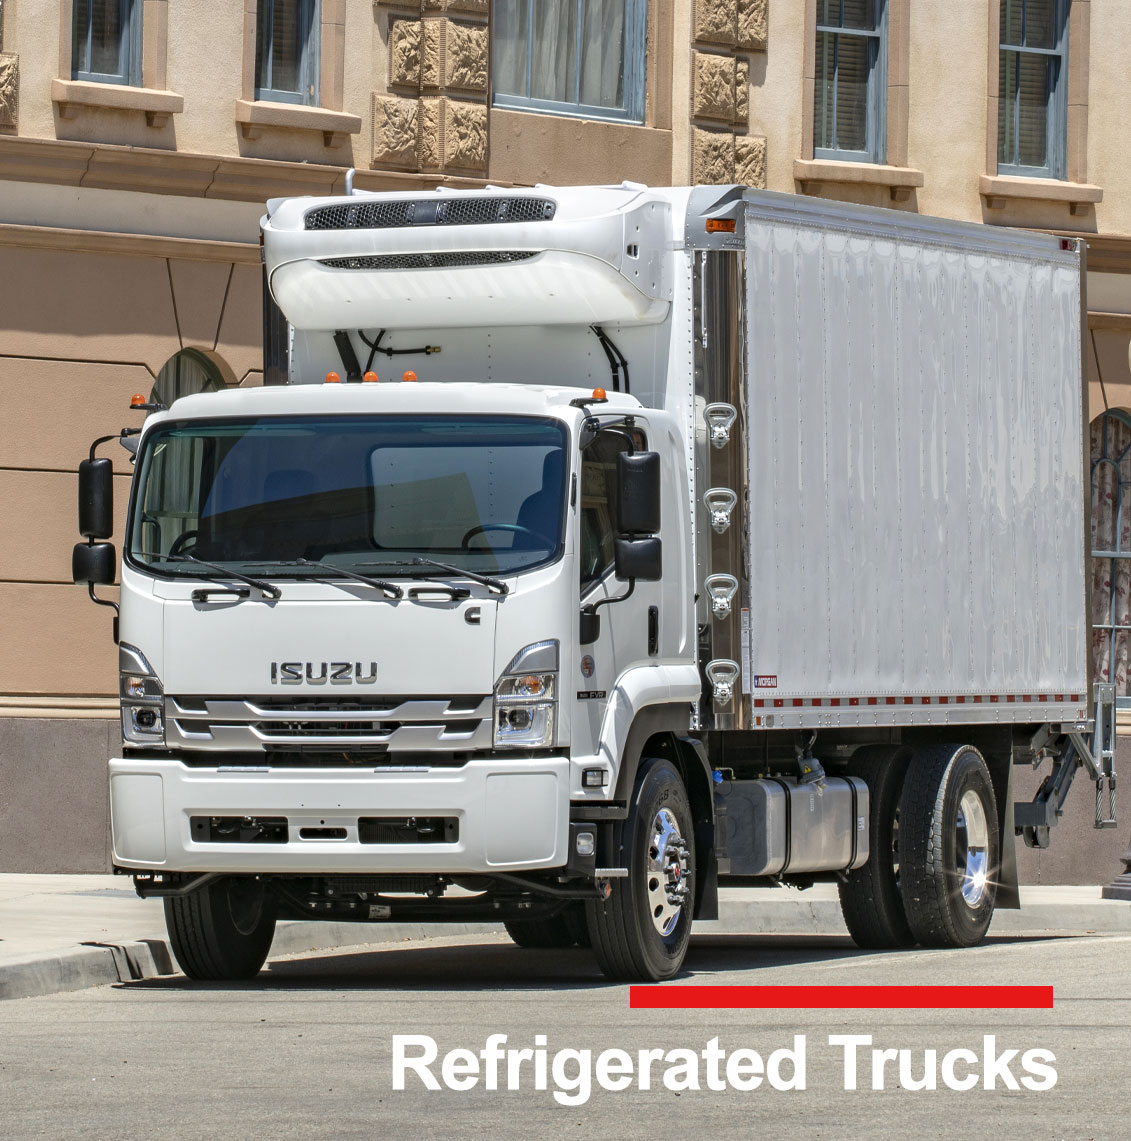 Go to gabriellitruck.com (learn-more--refrigerated-trucks subpage)